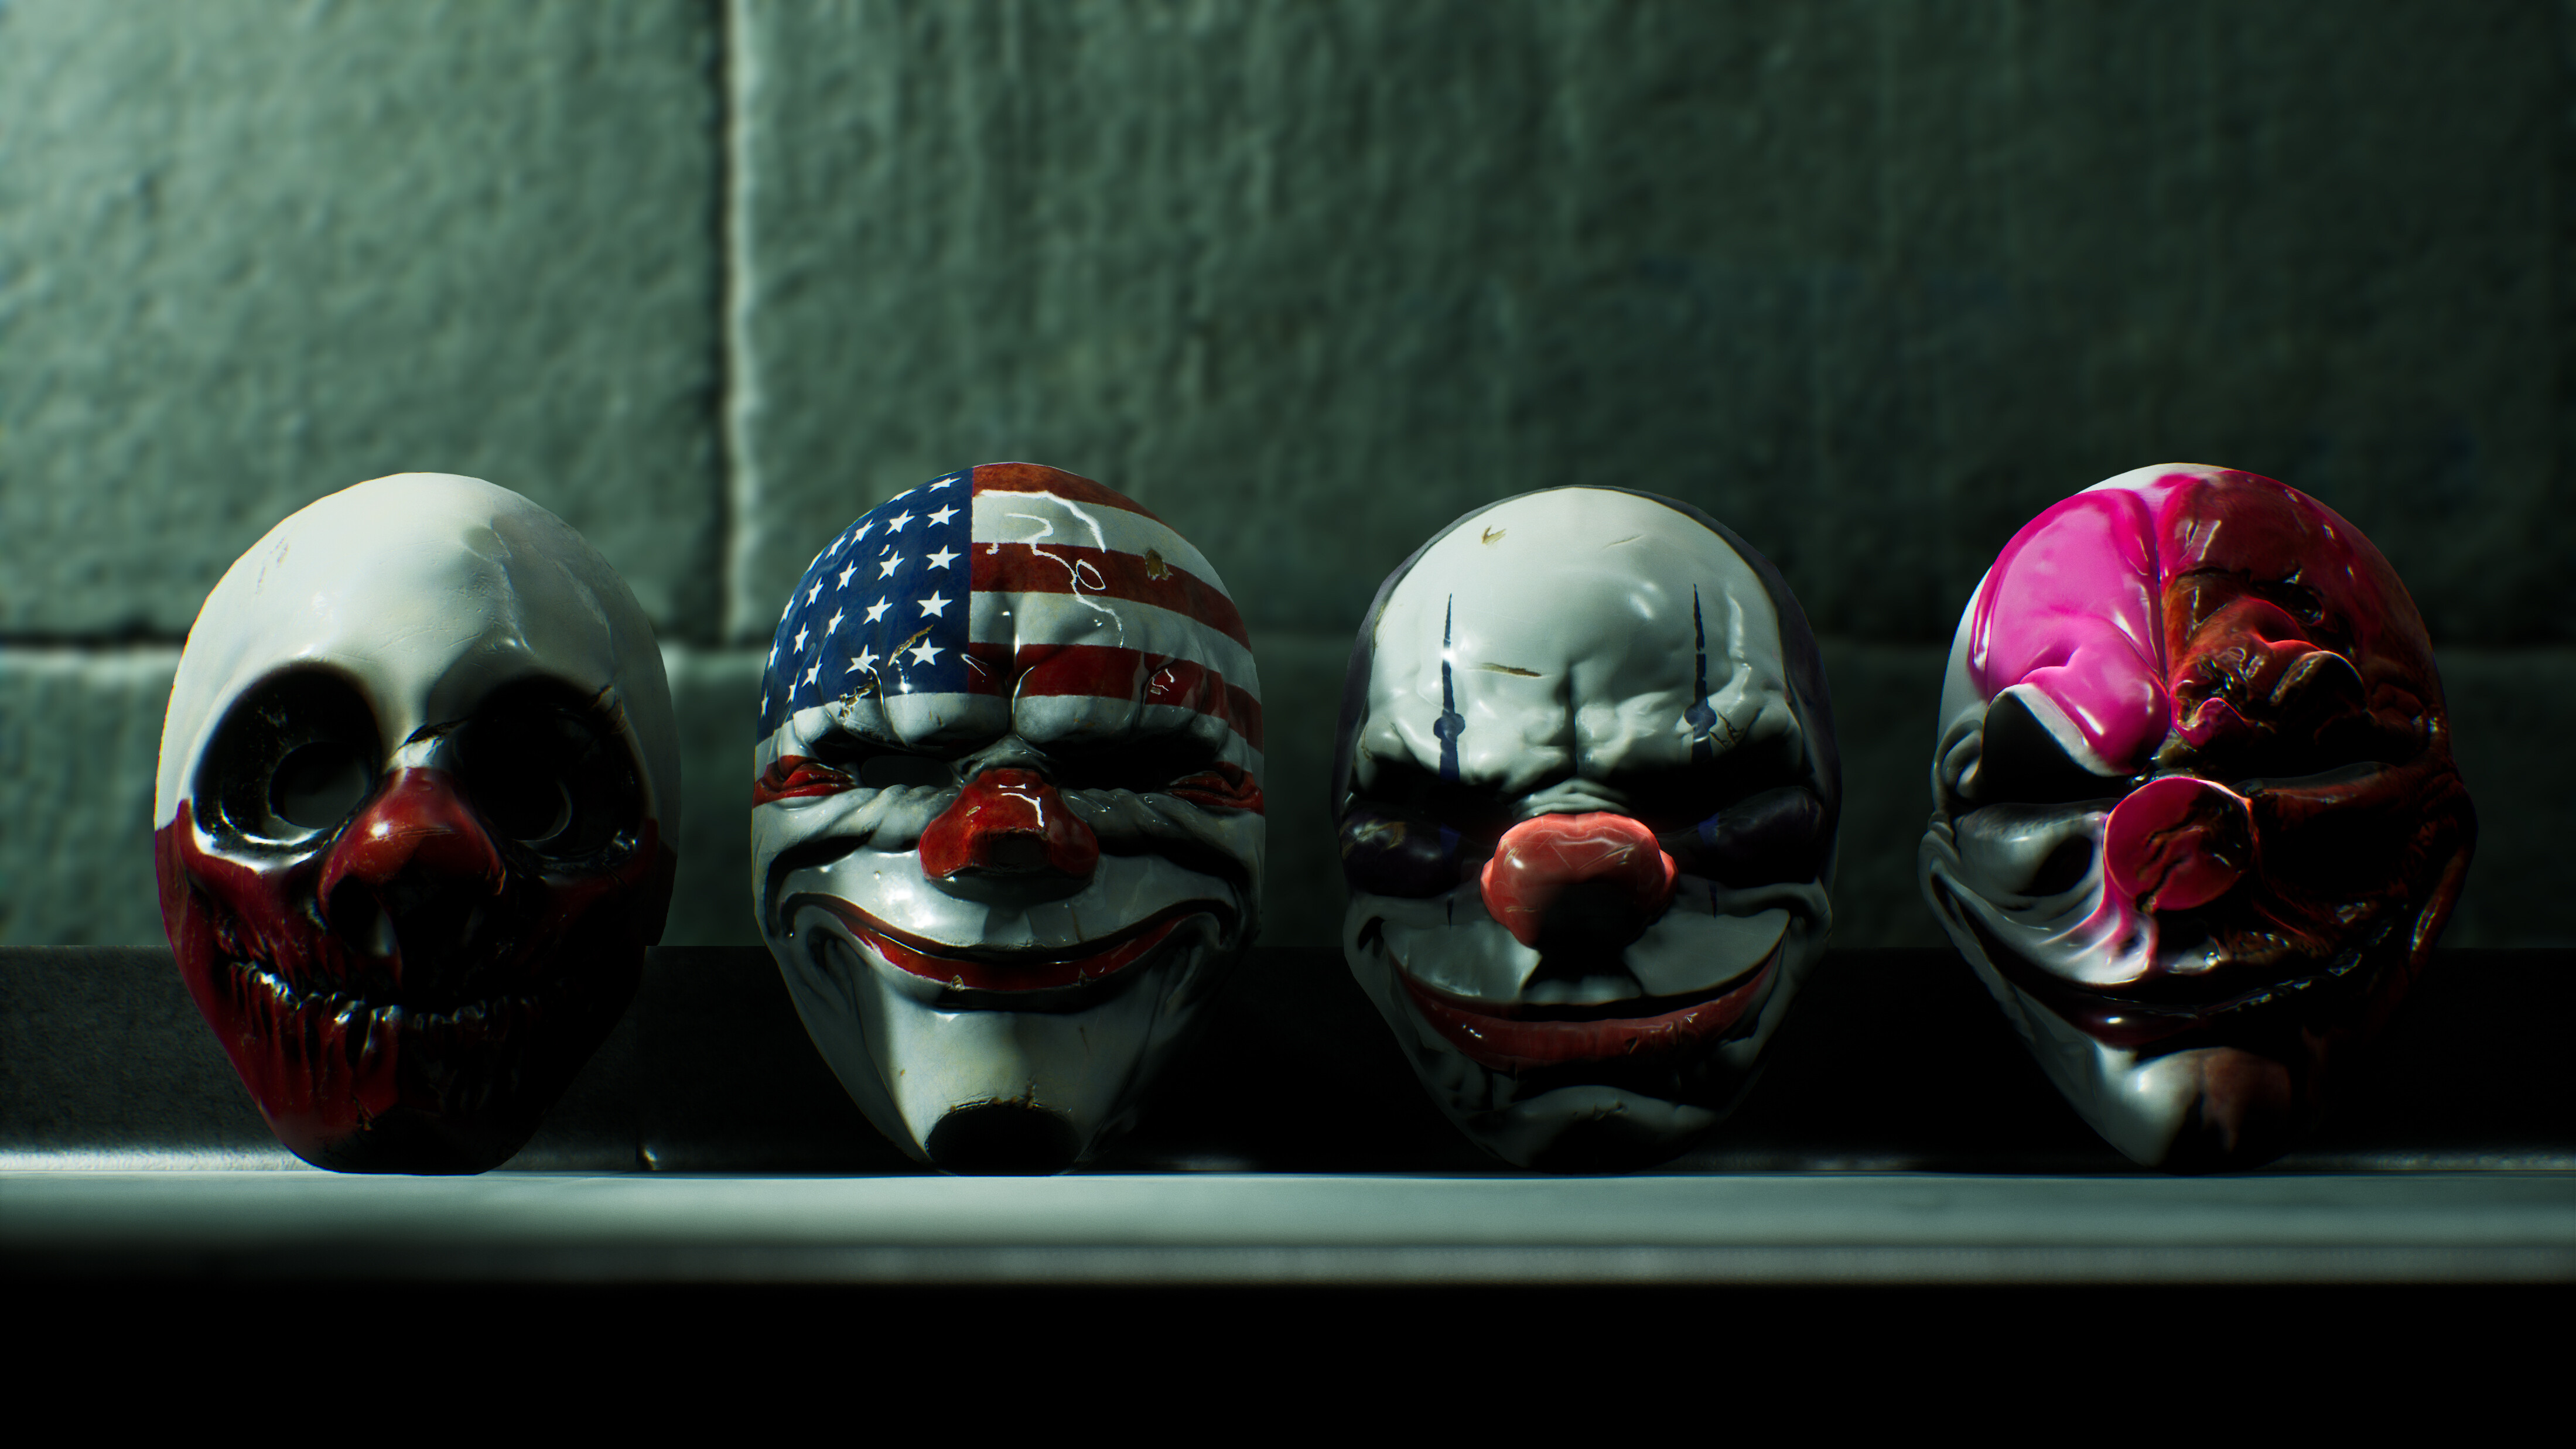 PAYDAY 3 on Steam